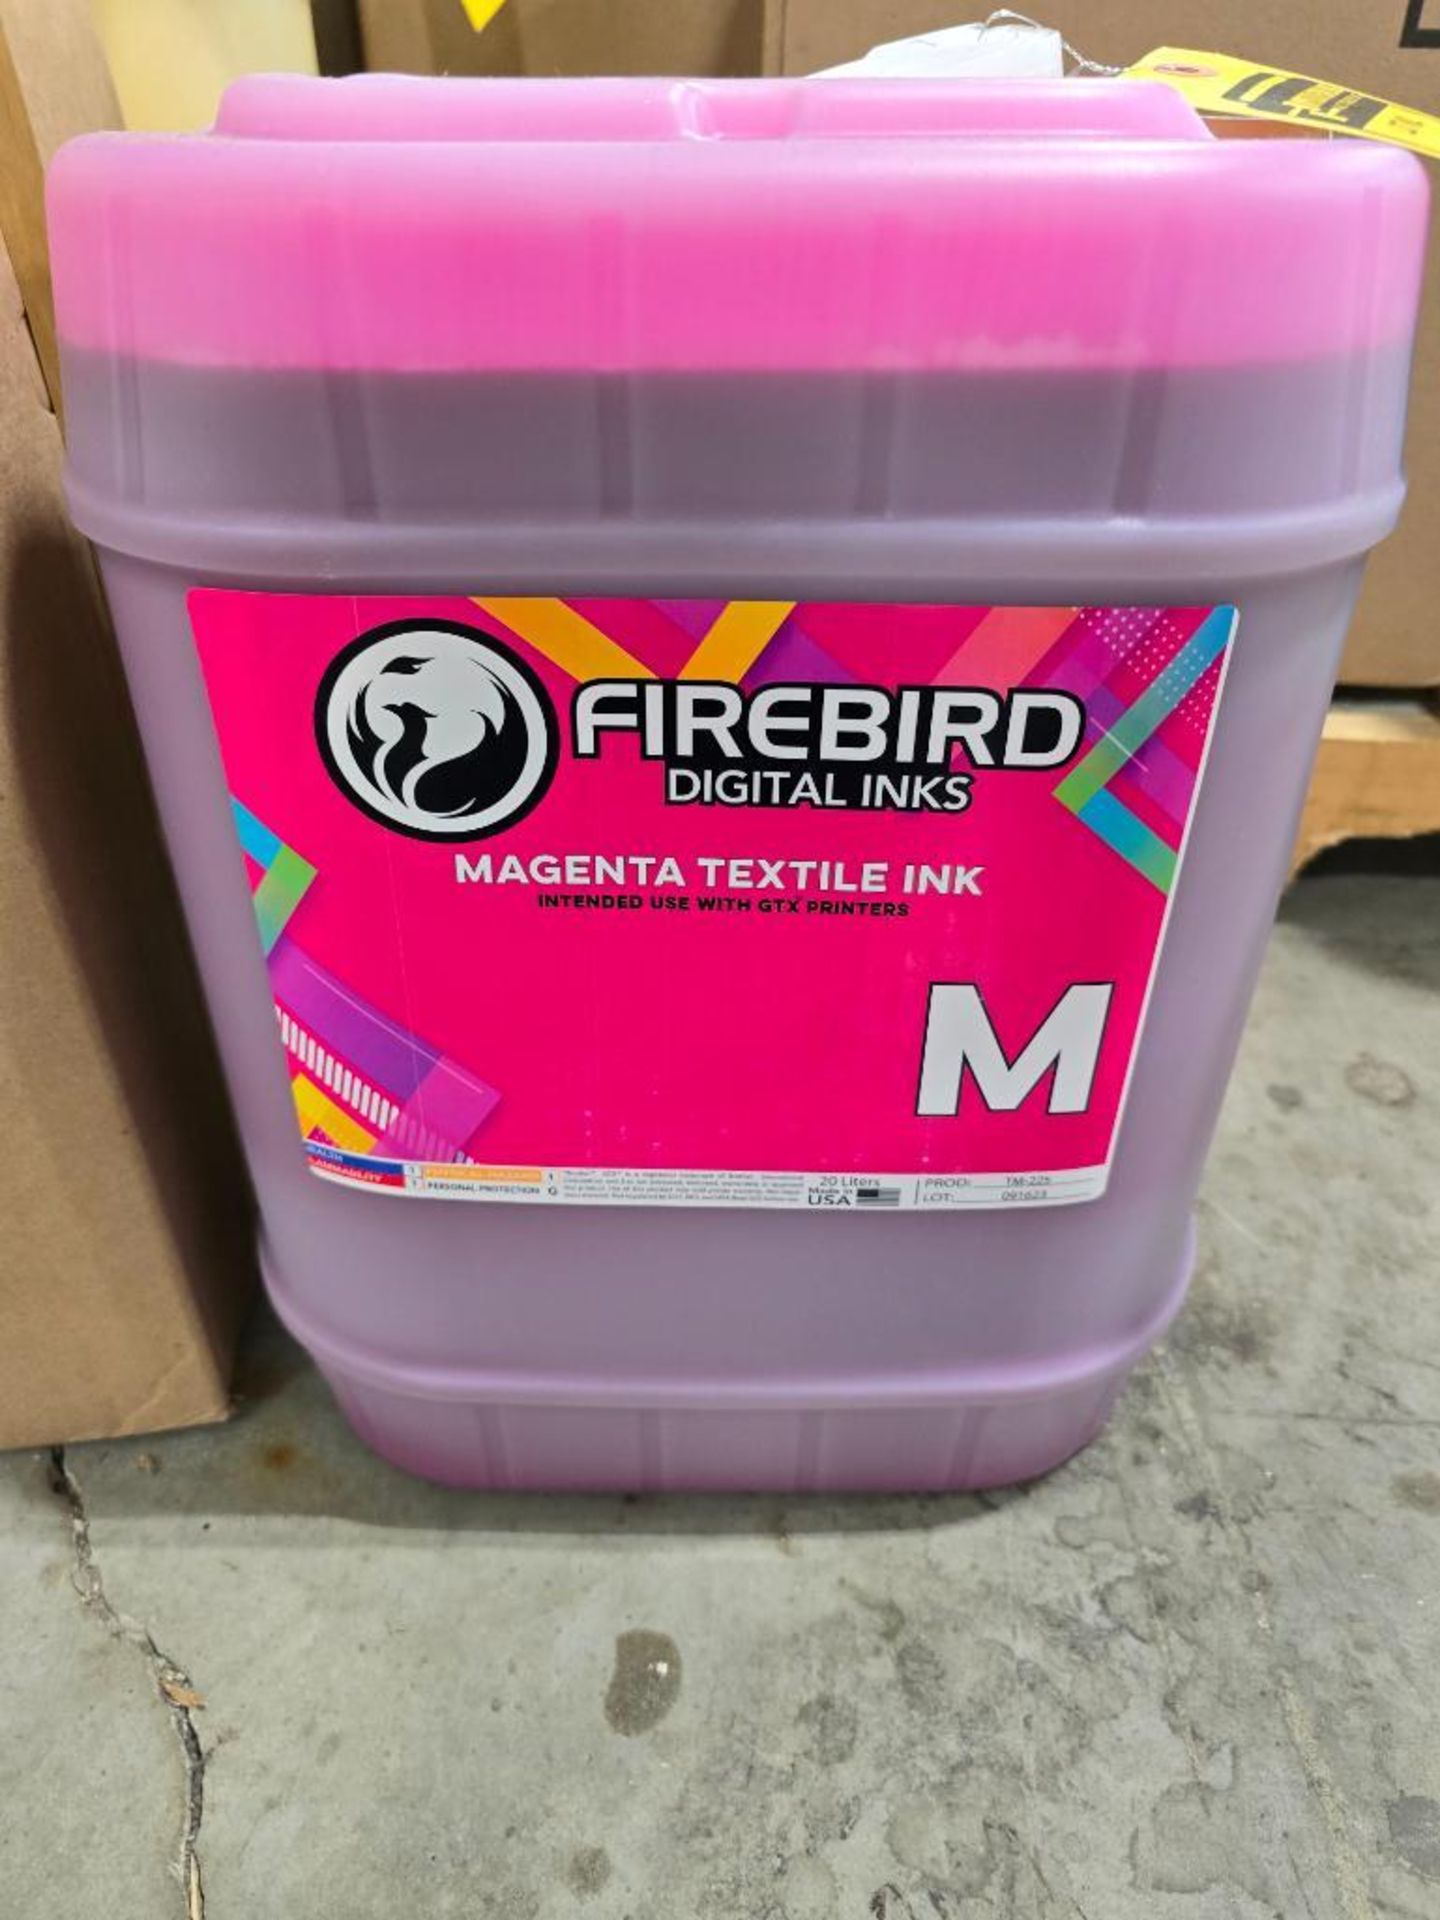 Firebird Red Magenta Textile Ink, 20-Liter Container, Product: TM-225